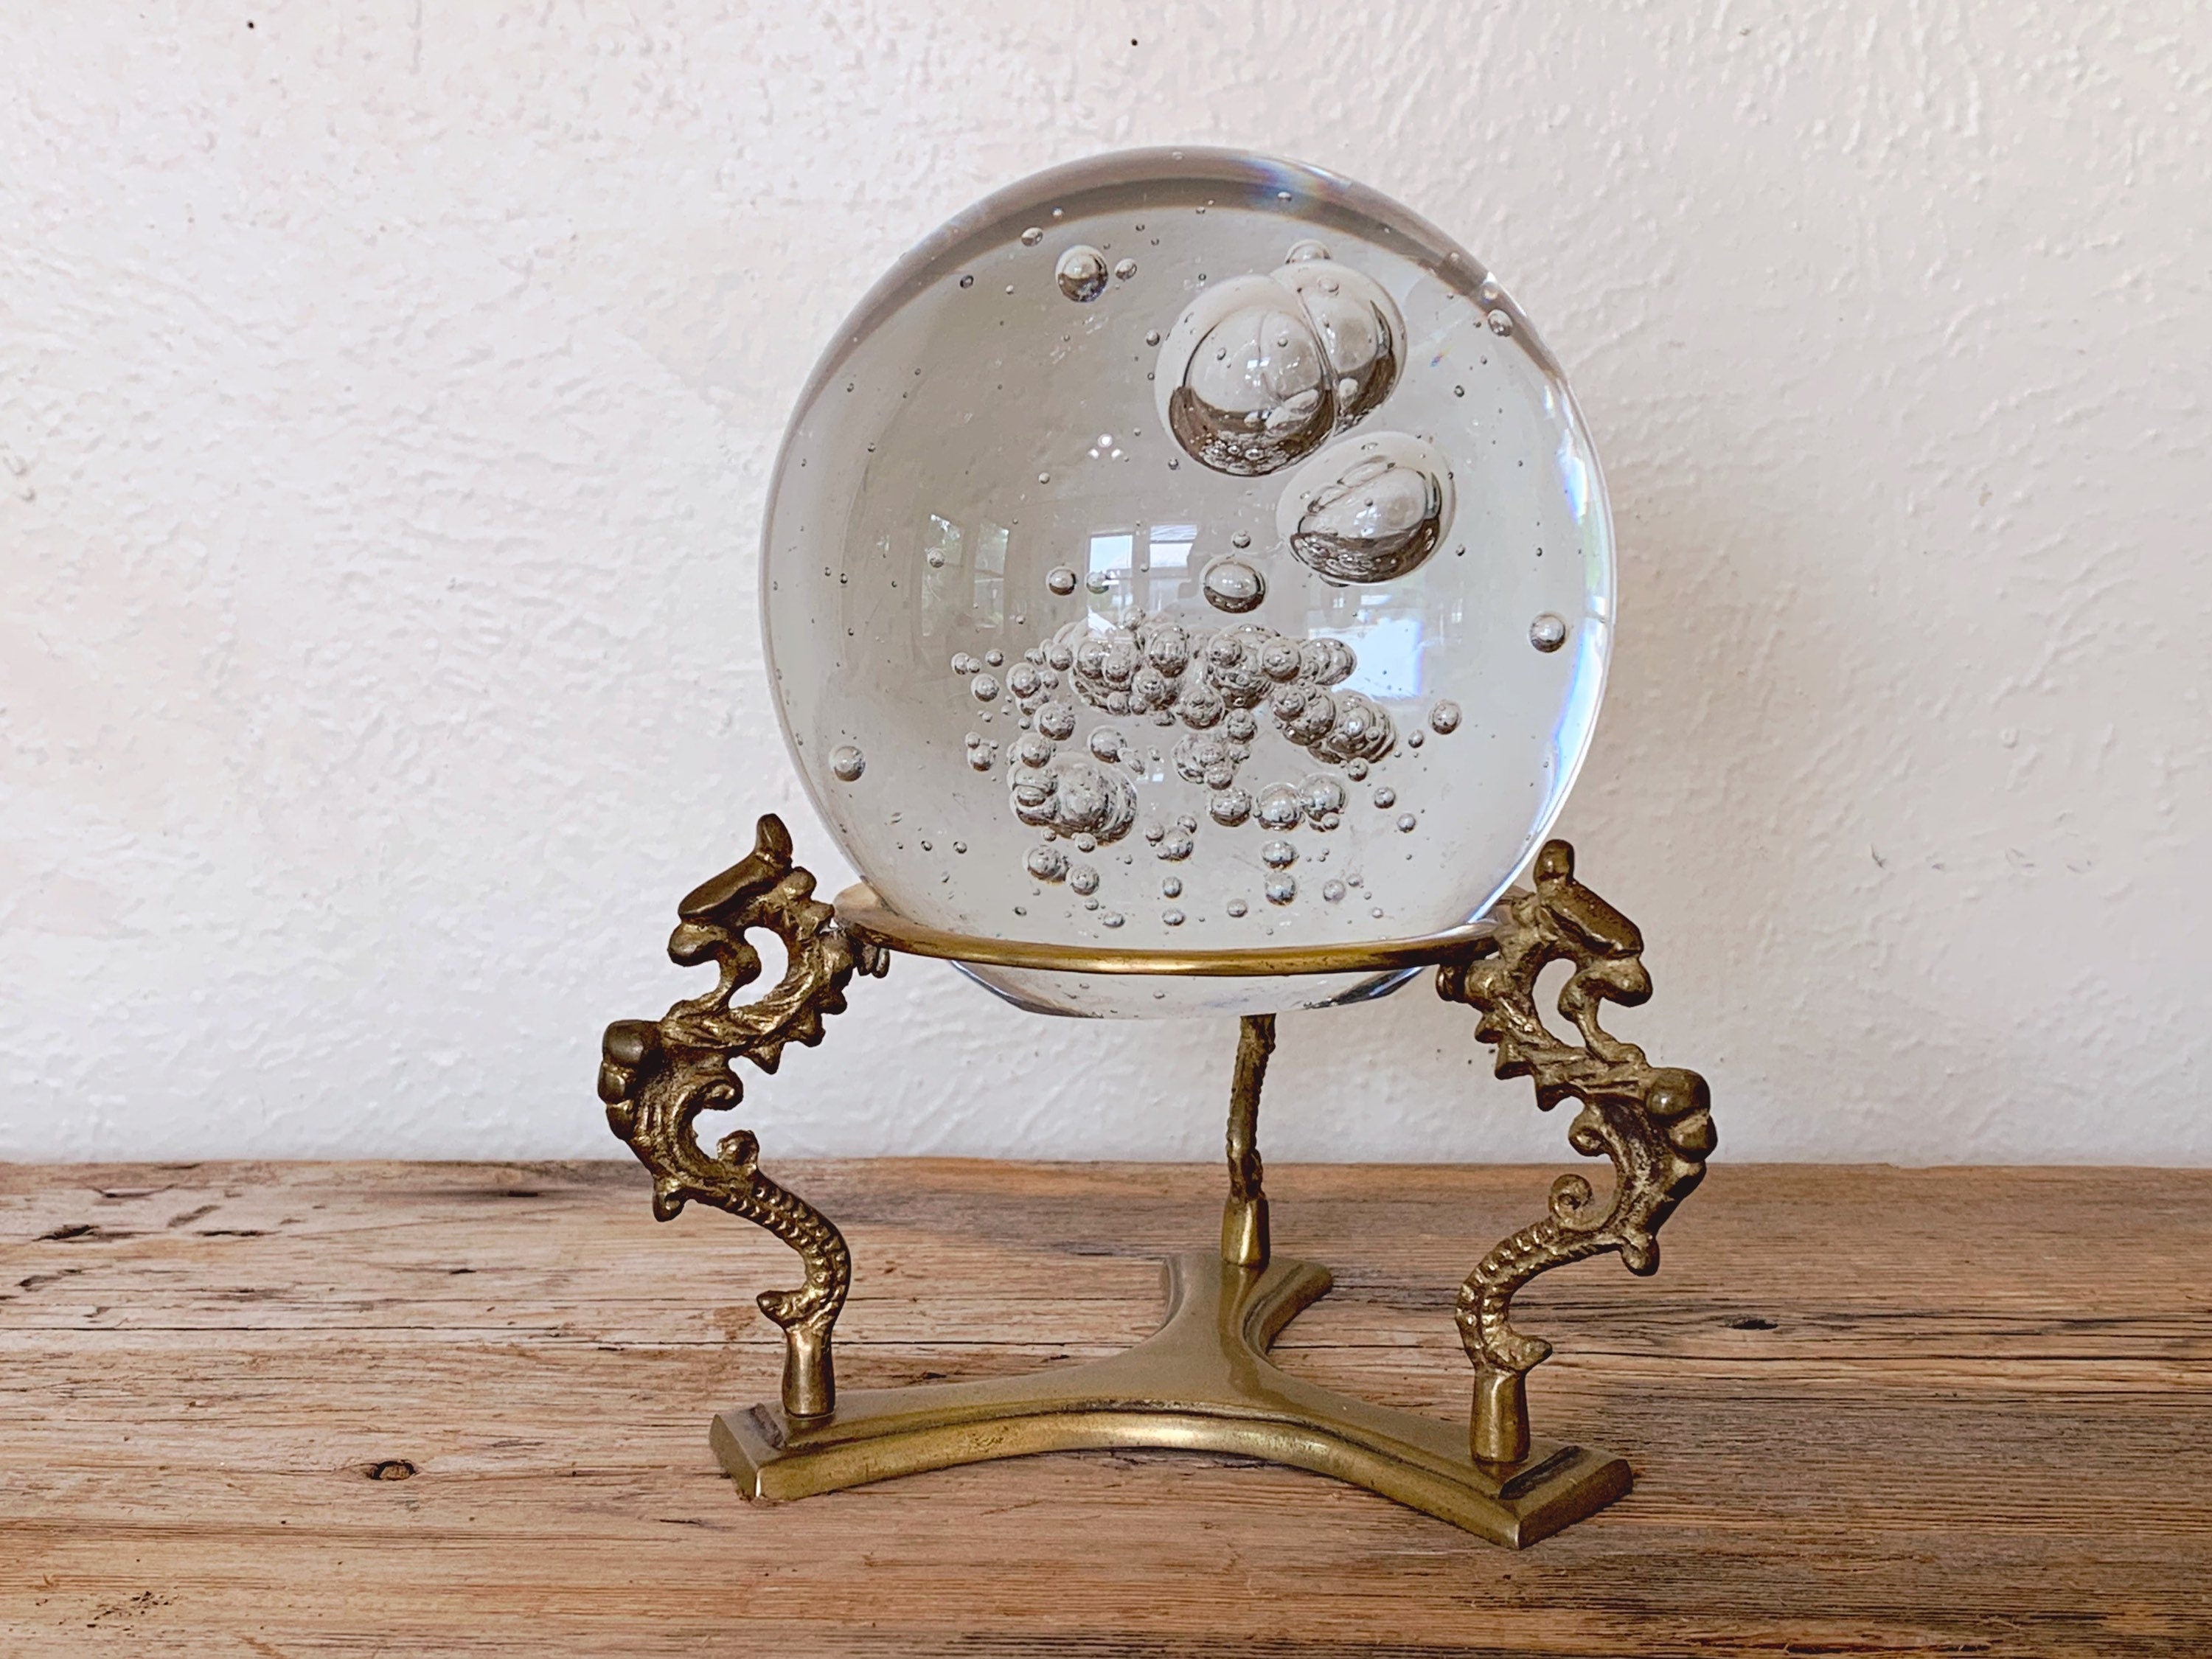 Large Vintage Lead Crystal Ball Sphere on Ornate Dragon Brass Stand | Heavy Paperweight on Tripod Metal Stand | Office Desk Decor